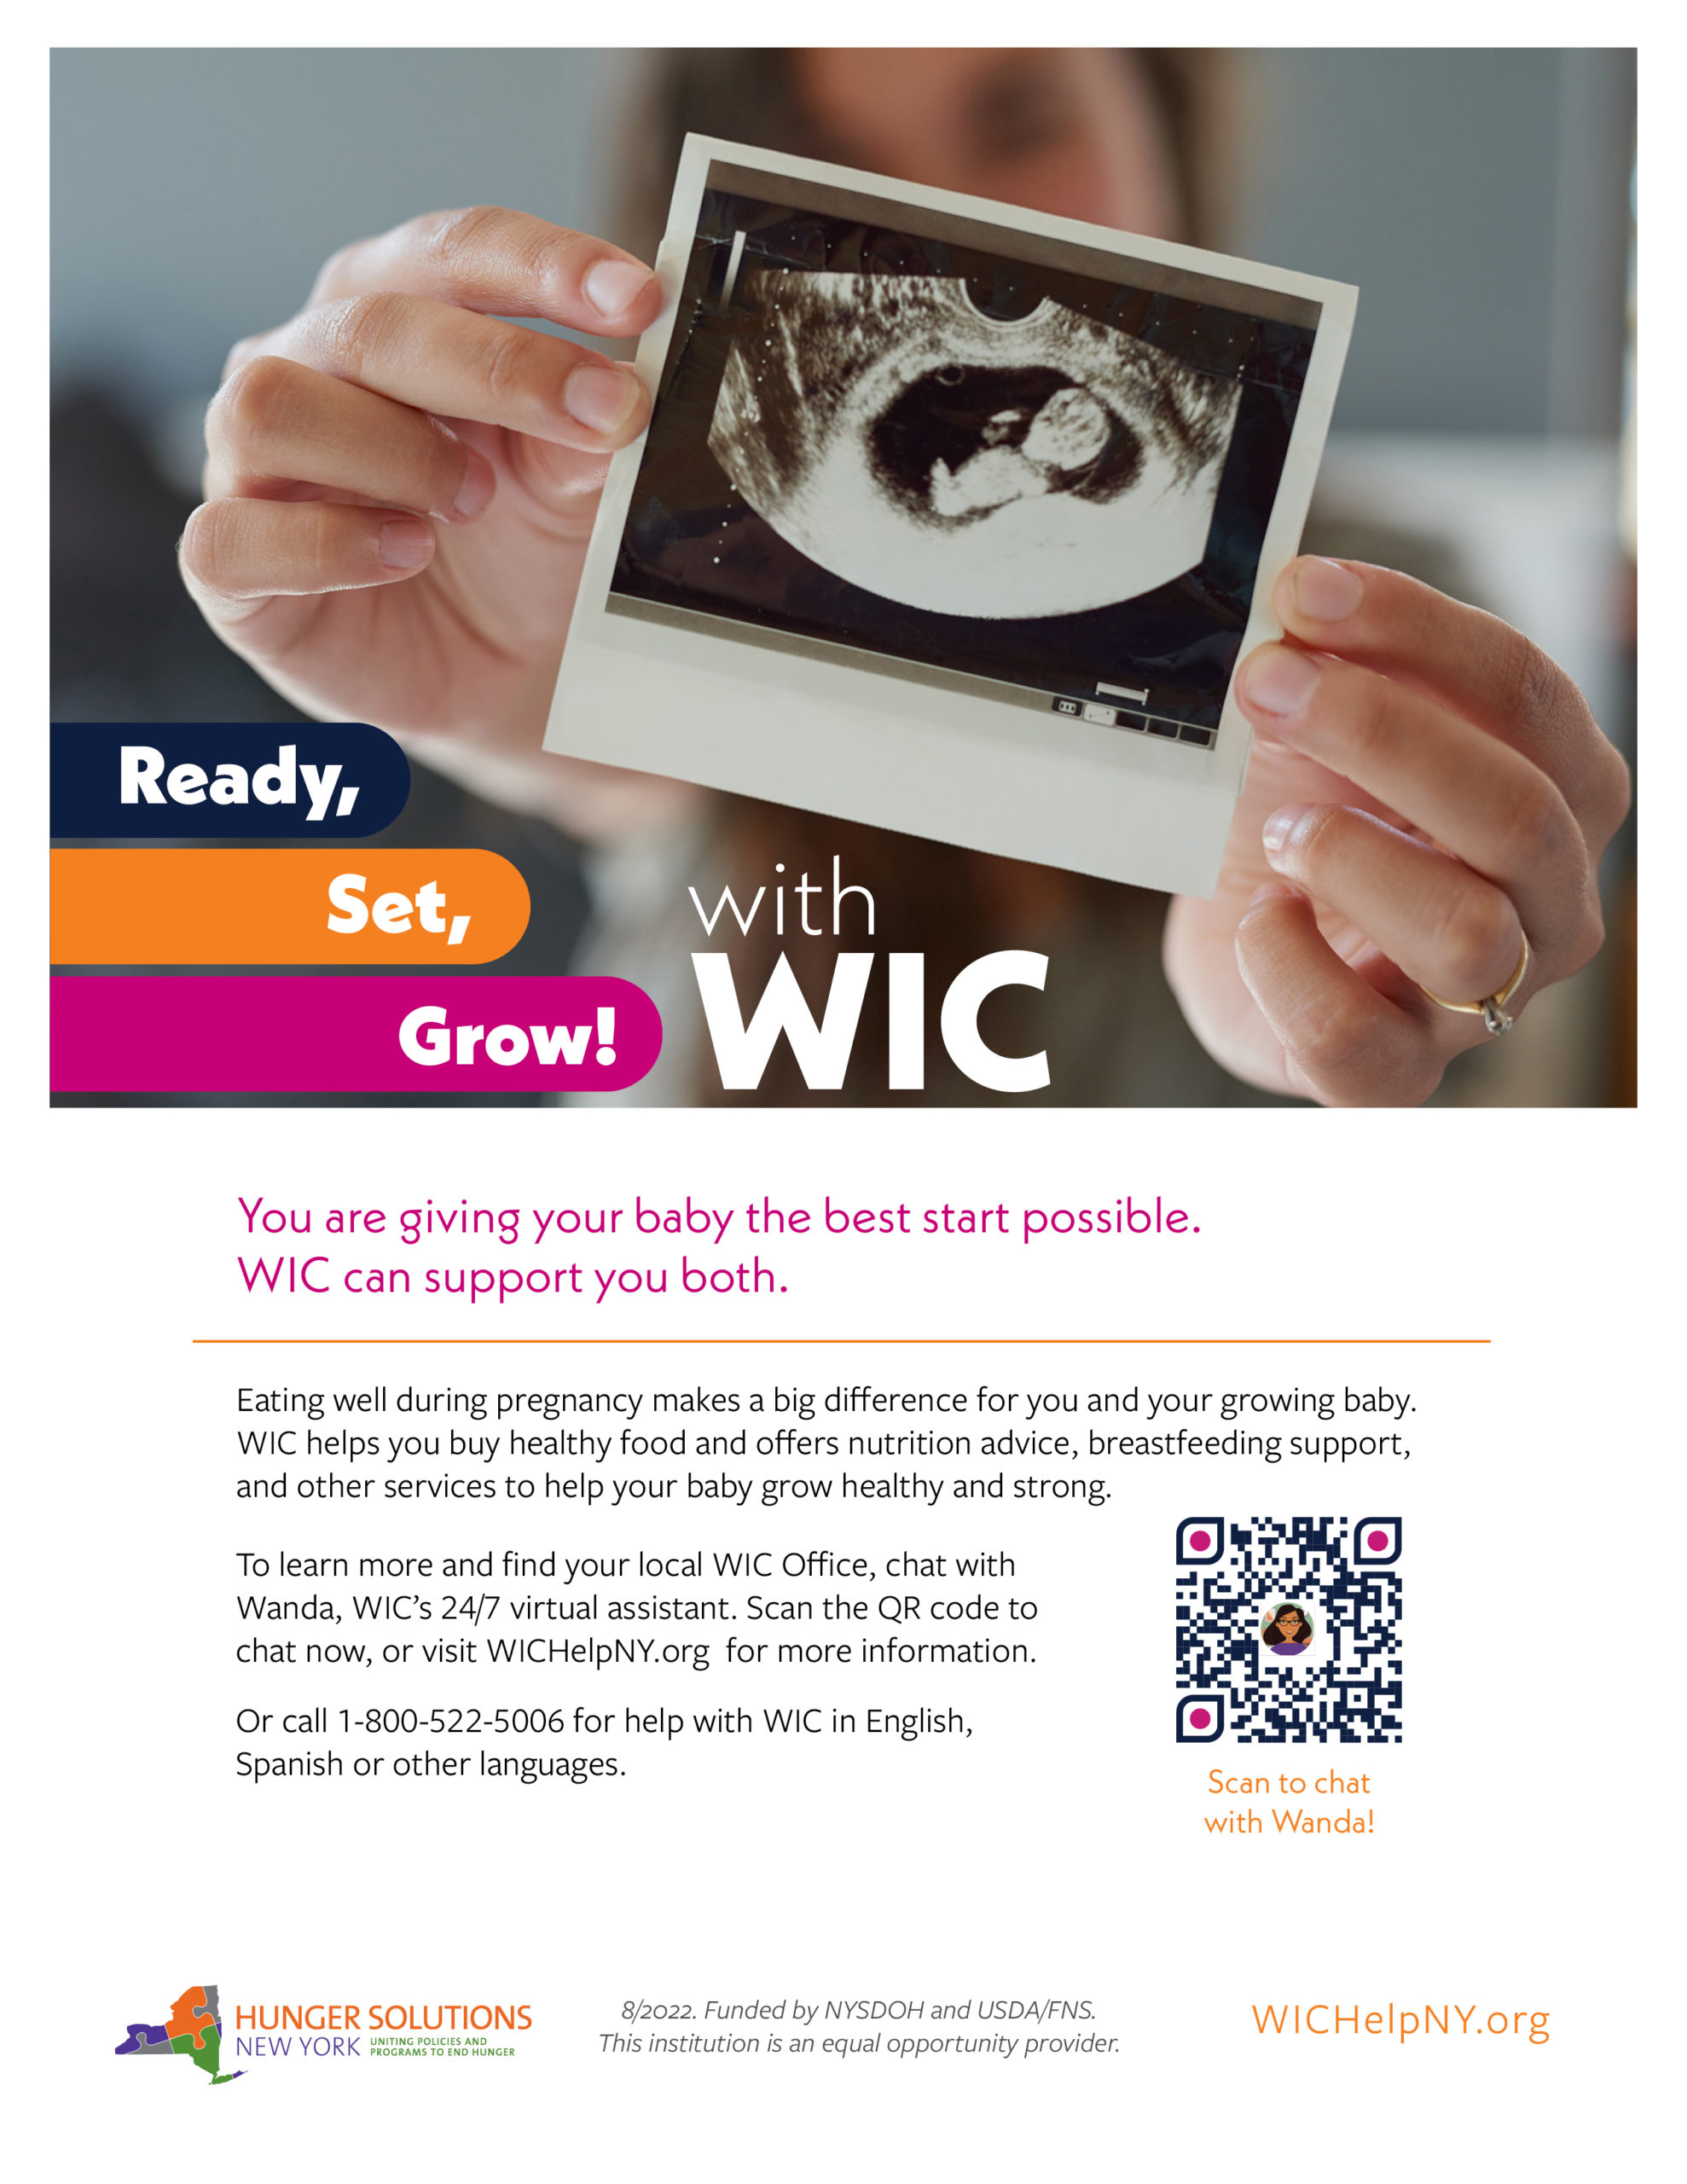 flyer with ultrasound image